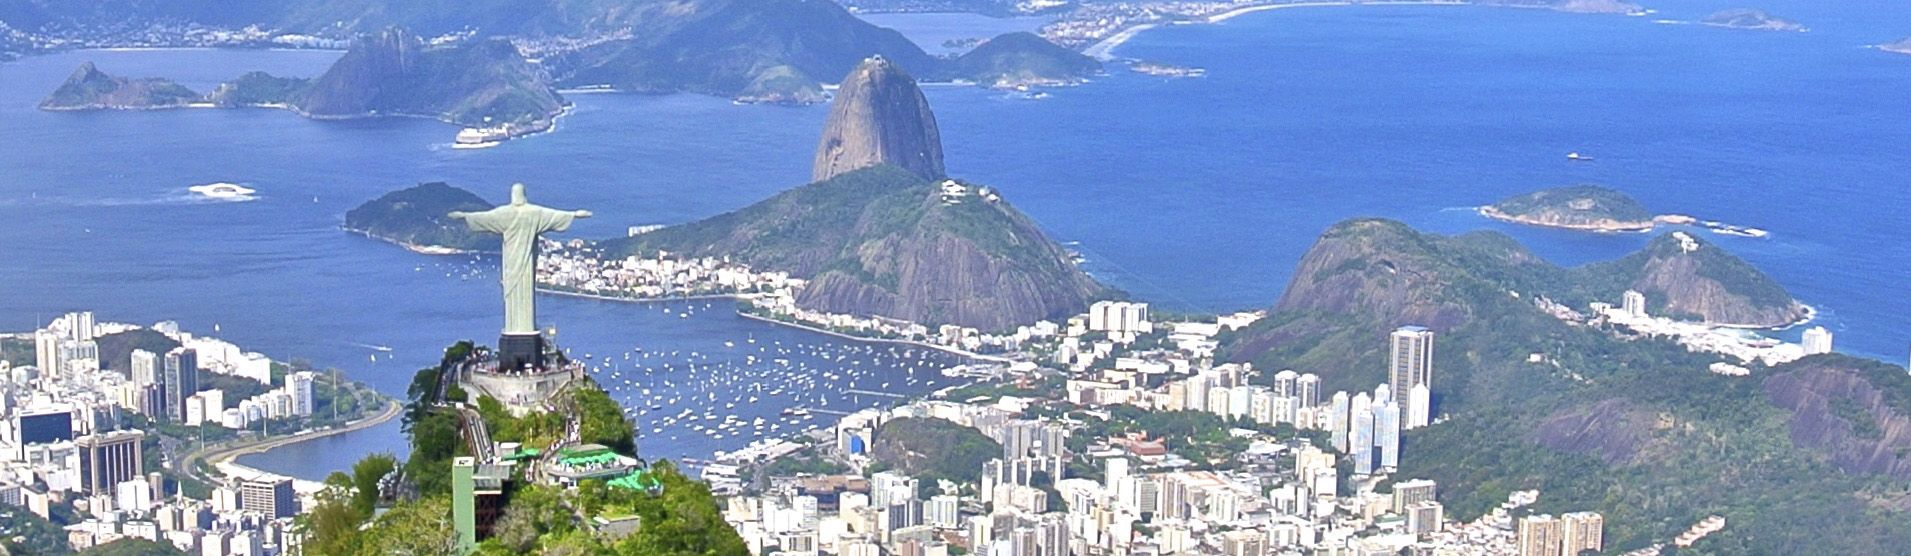 Aerial shot of Christ the Redeemer with Sugarloaf Mountain in the distance in Rio de Janeiro on a luxury Brazil tour